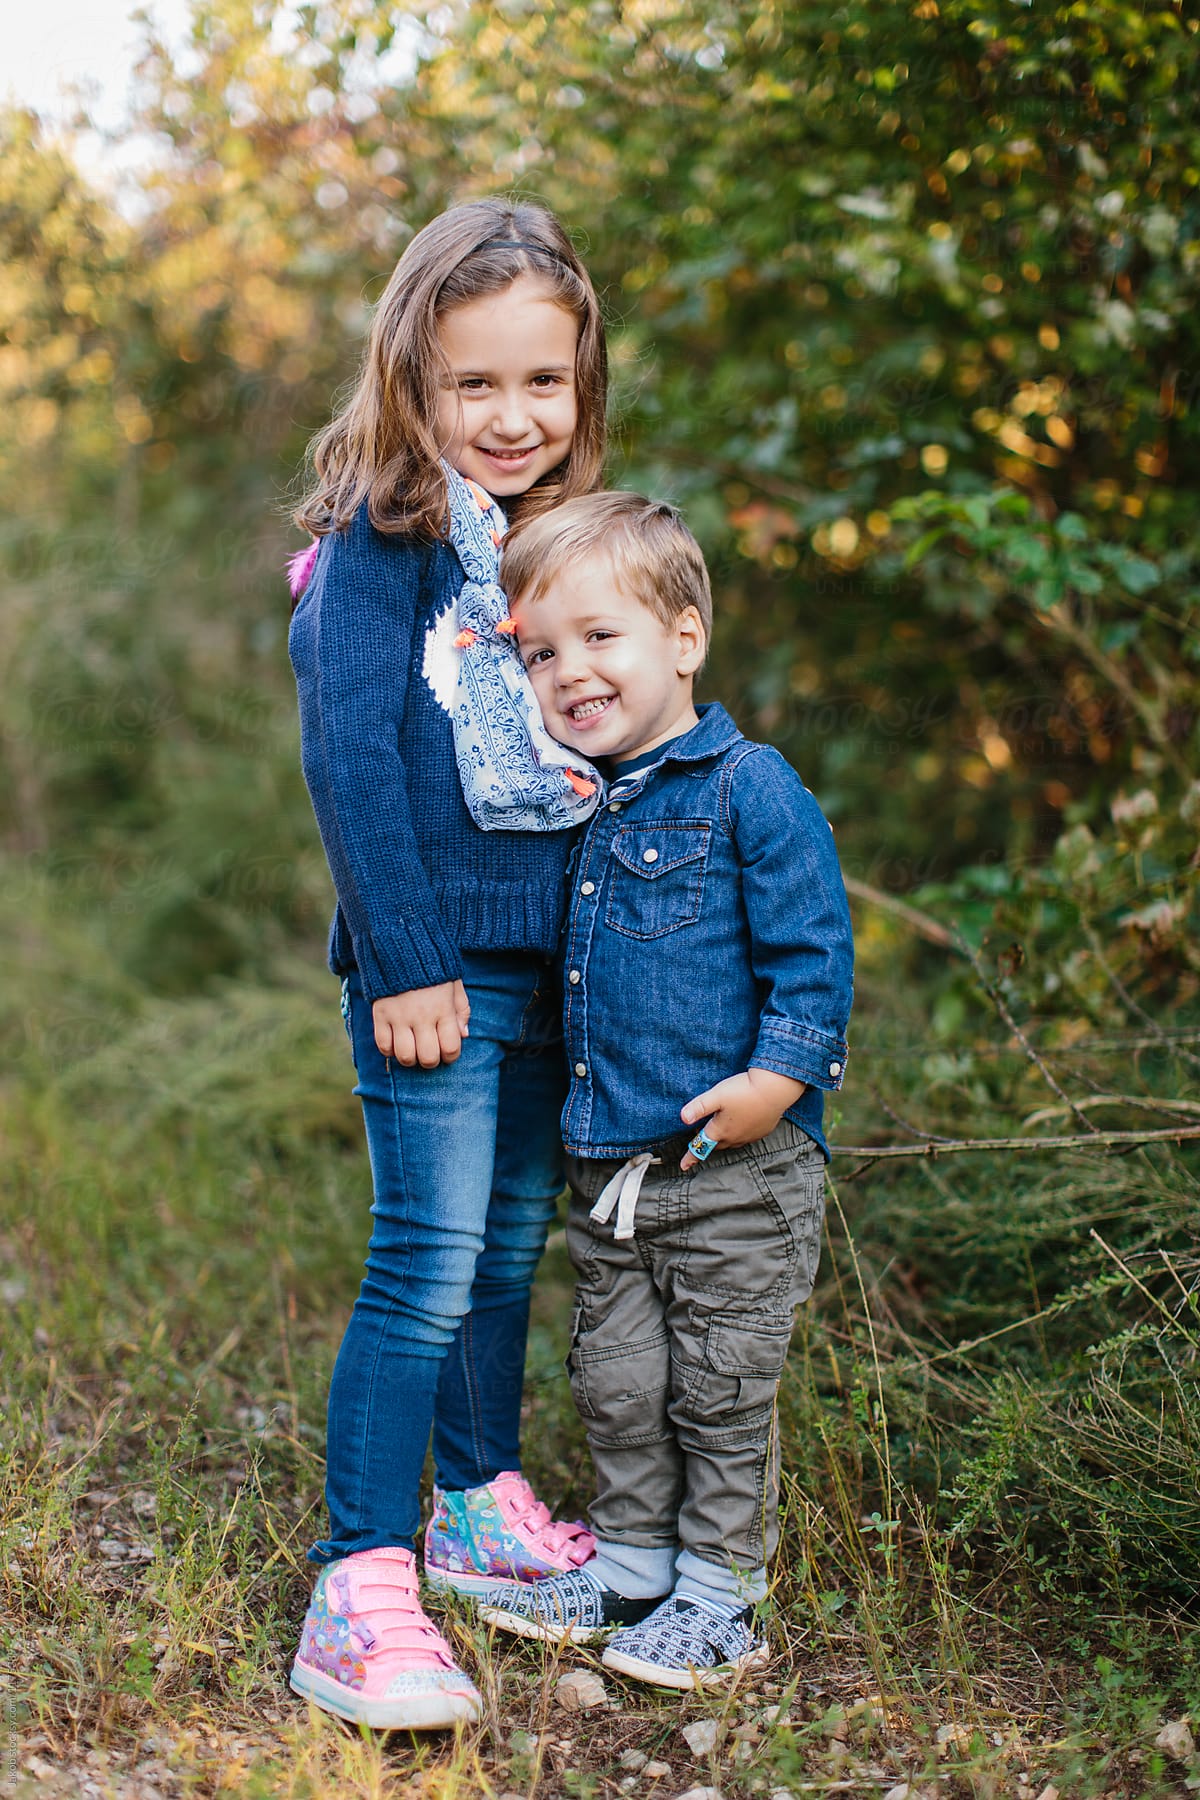 Beautiful Brother And Sister Holding Each Other By Stocksy Contributor Jakob Lagerstedt 